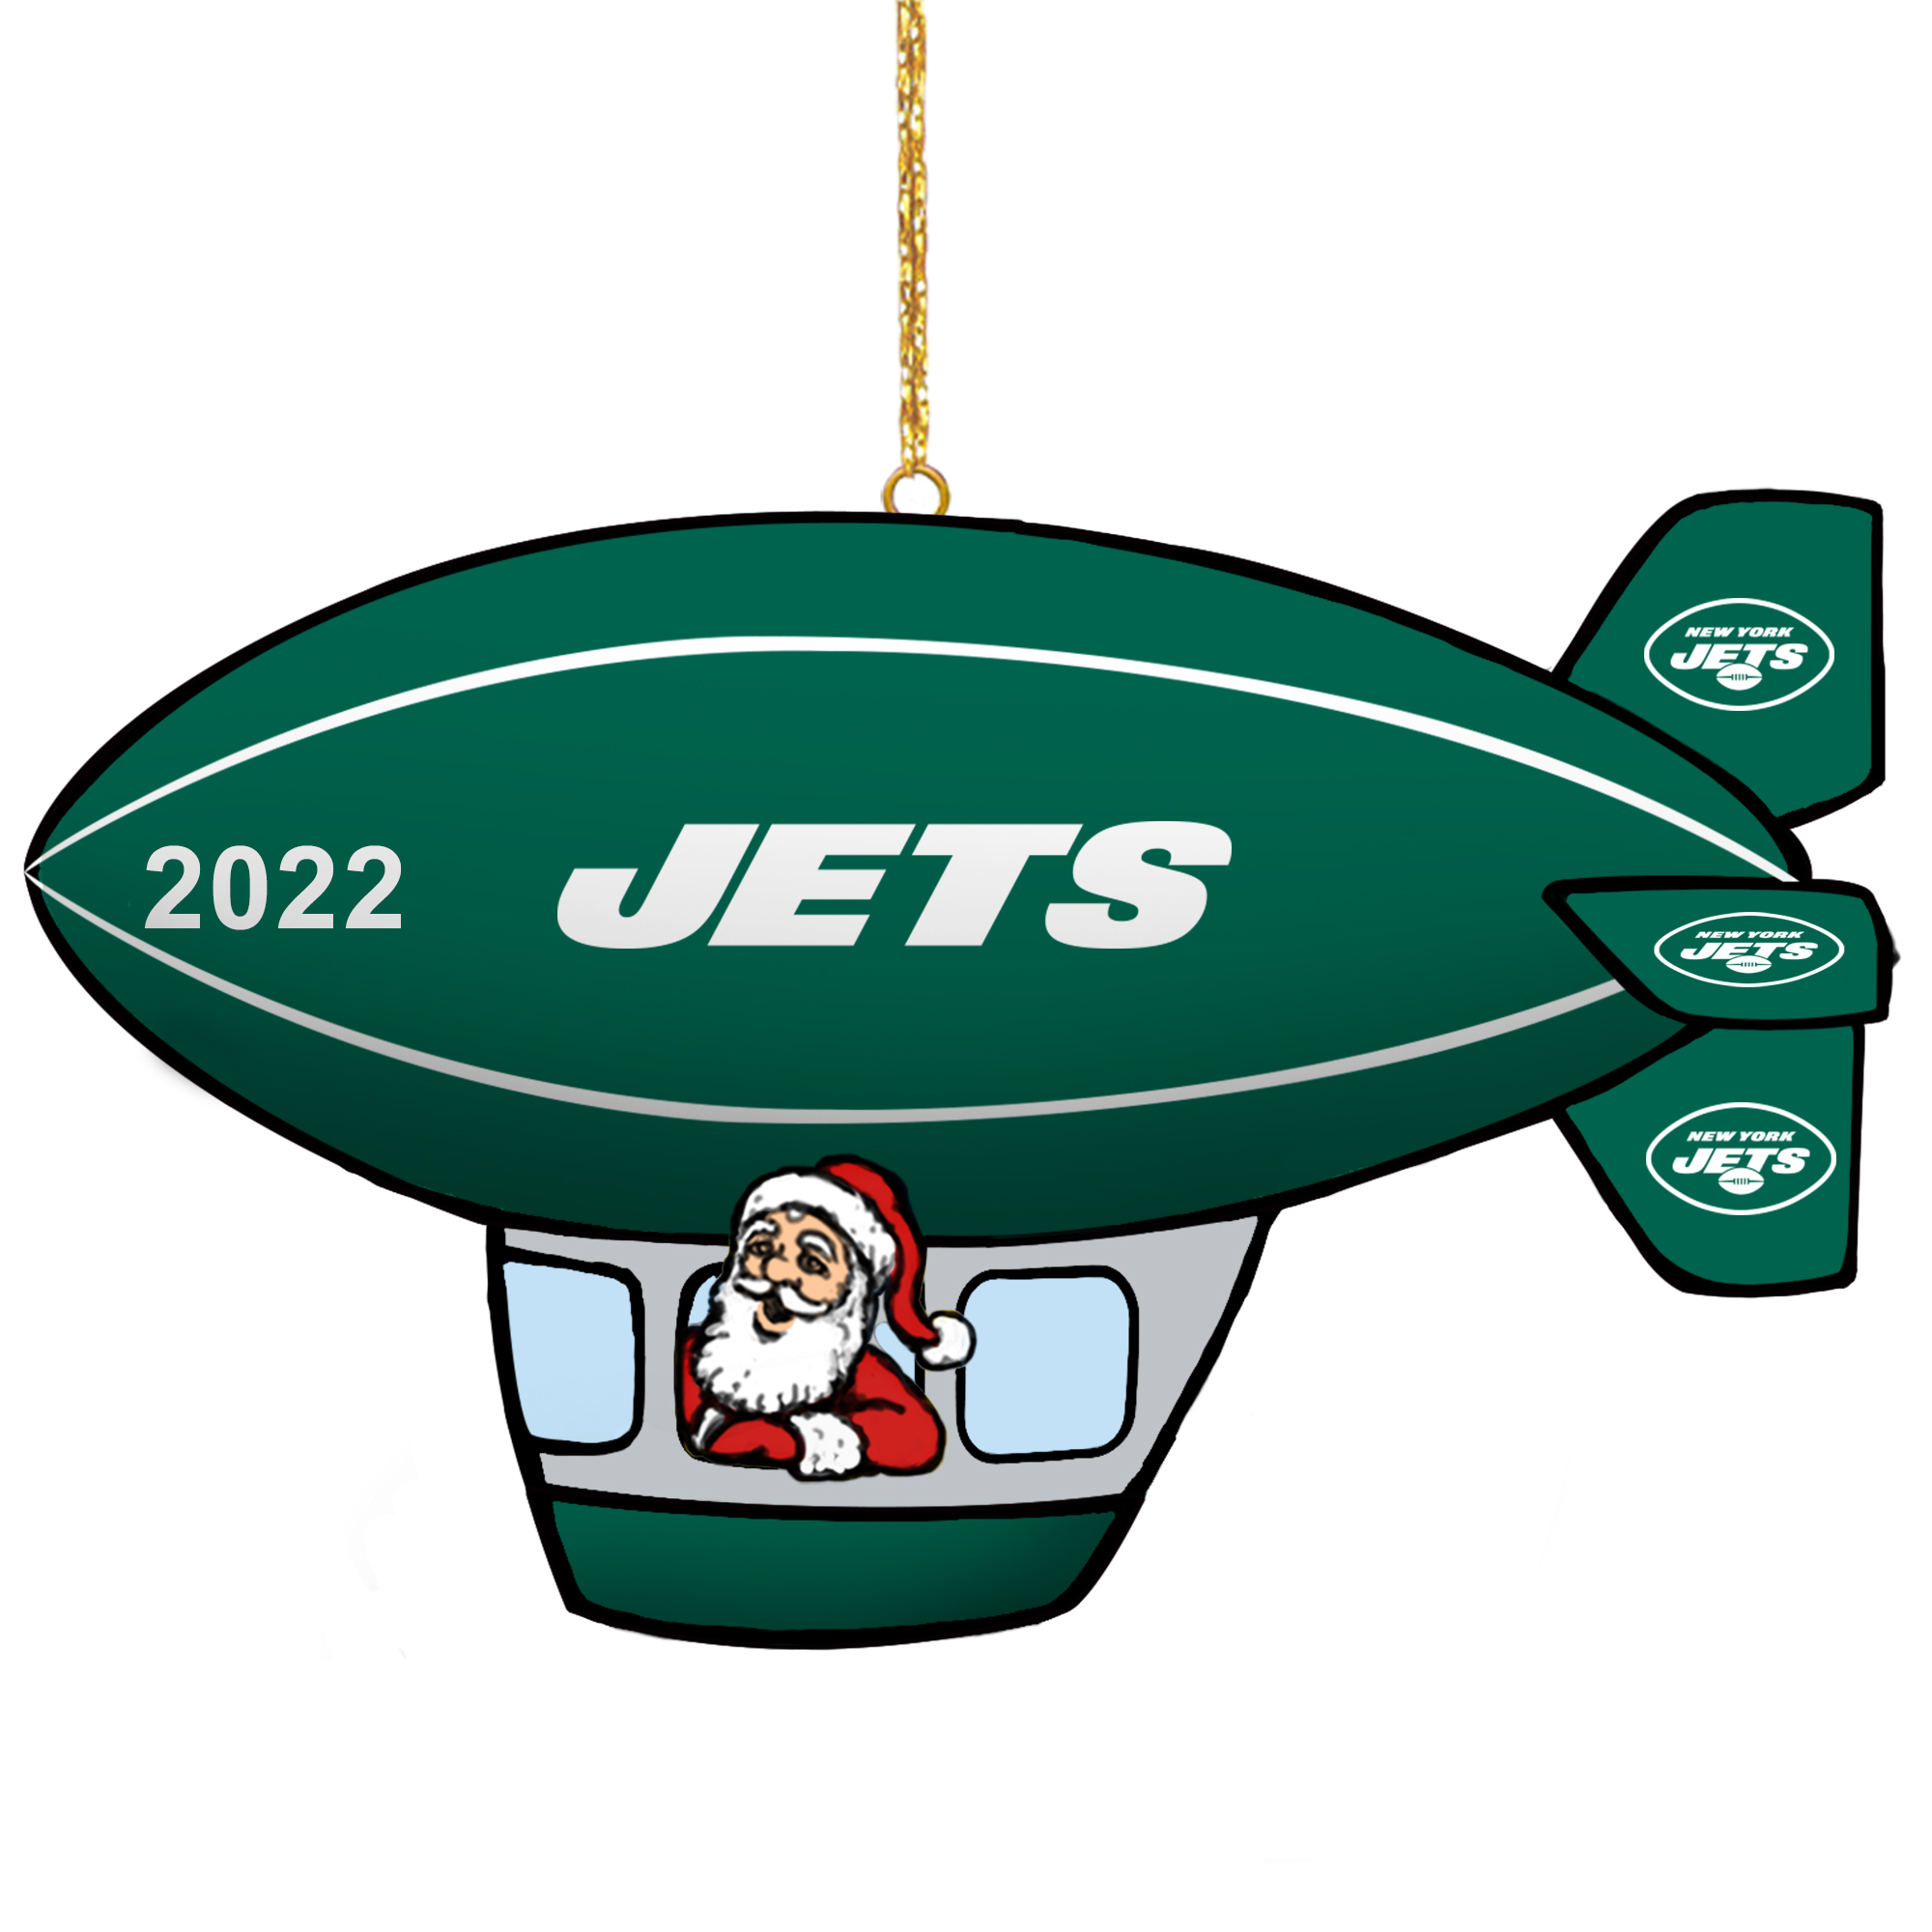 The 2022 Jets Ornament